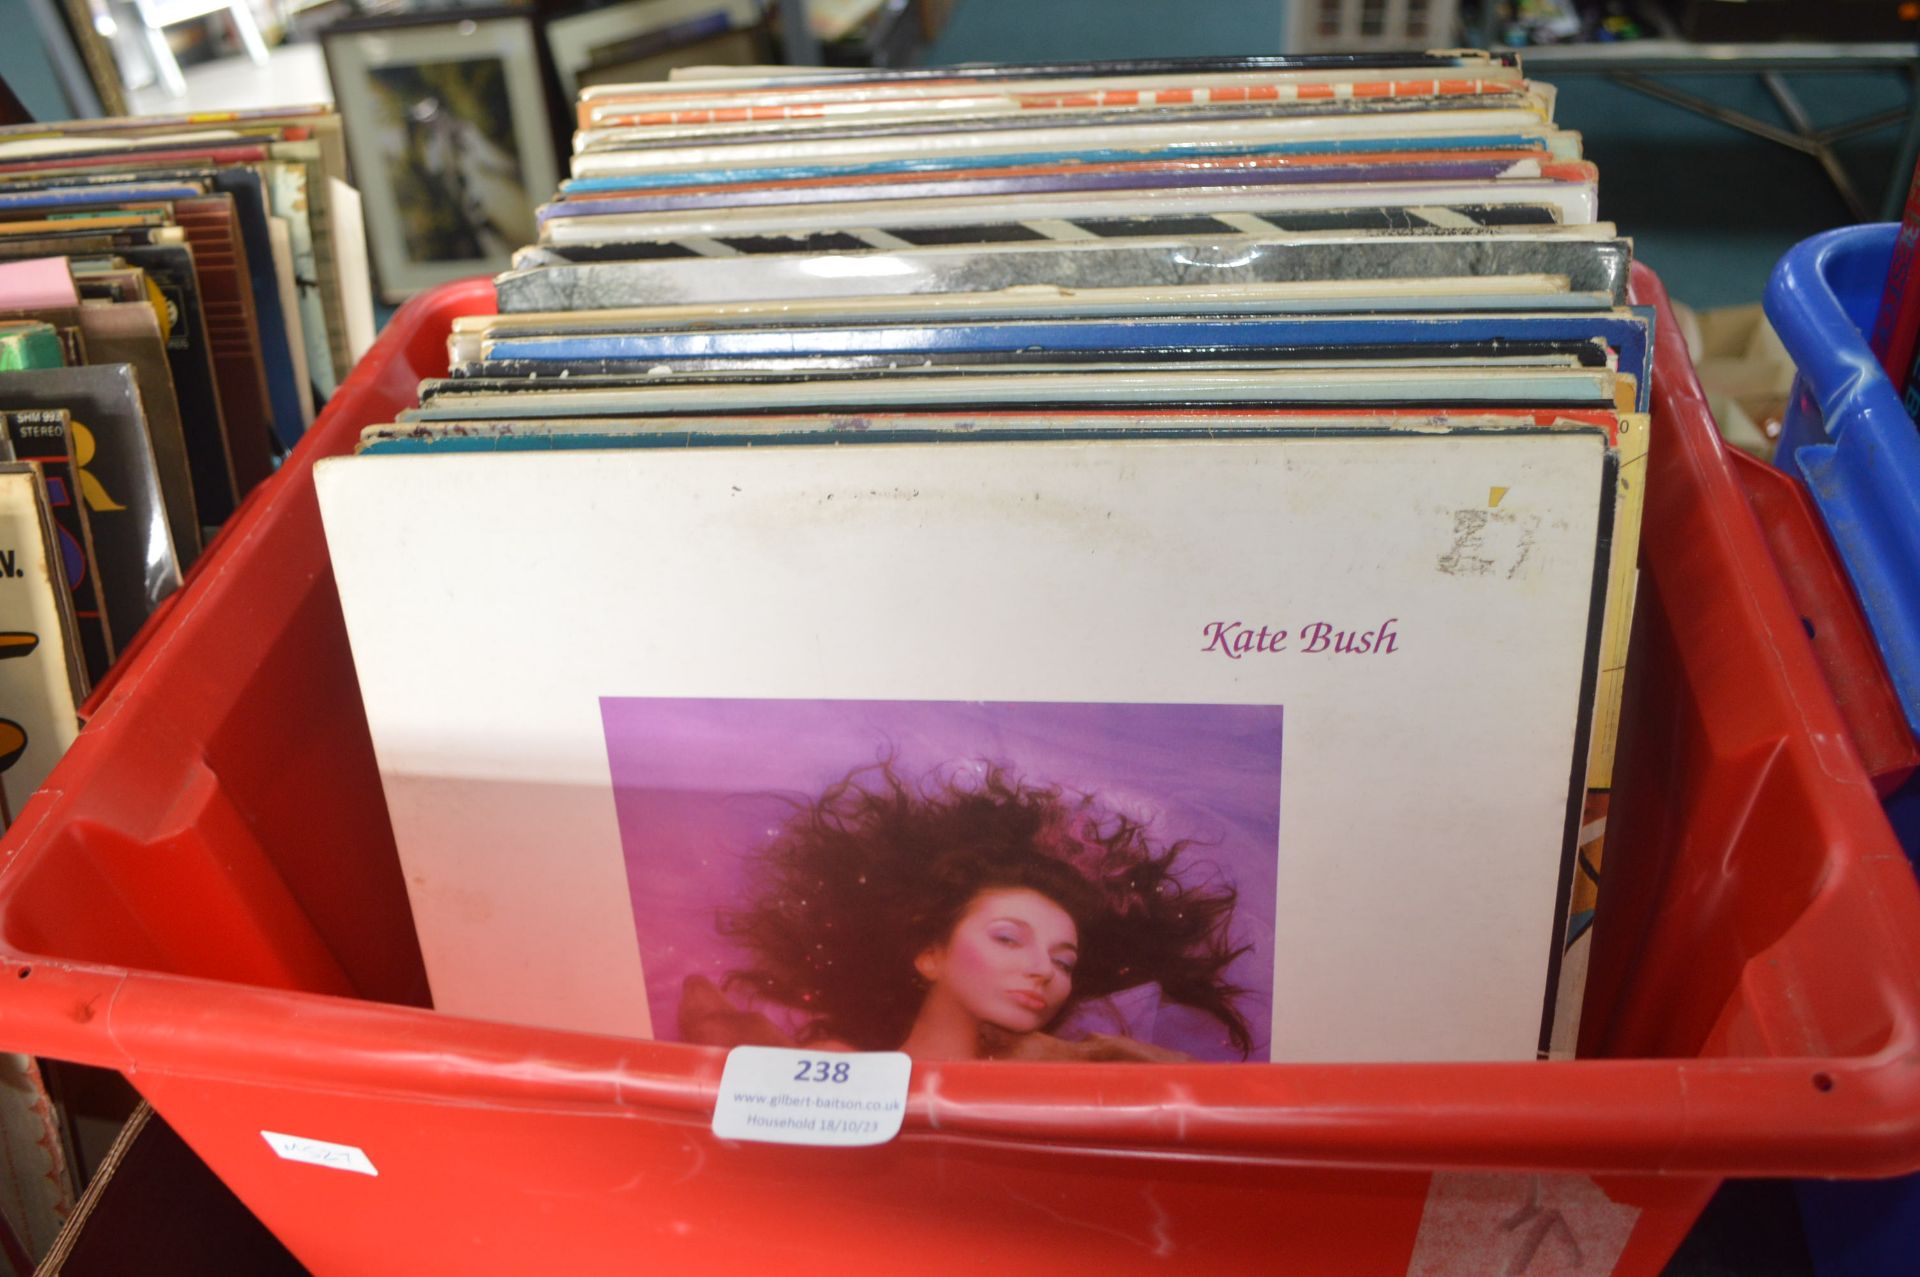 12" LP Records: Mixed Rock, Pop, and Oldies